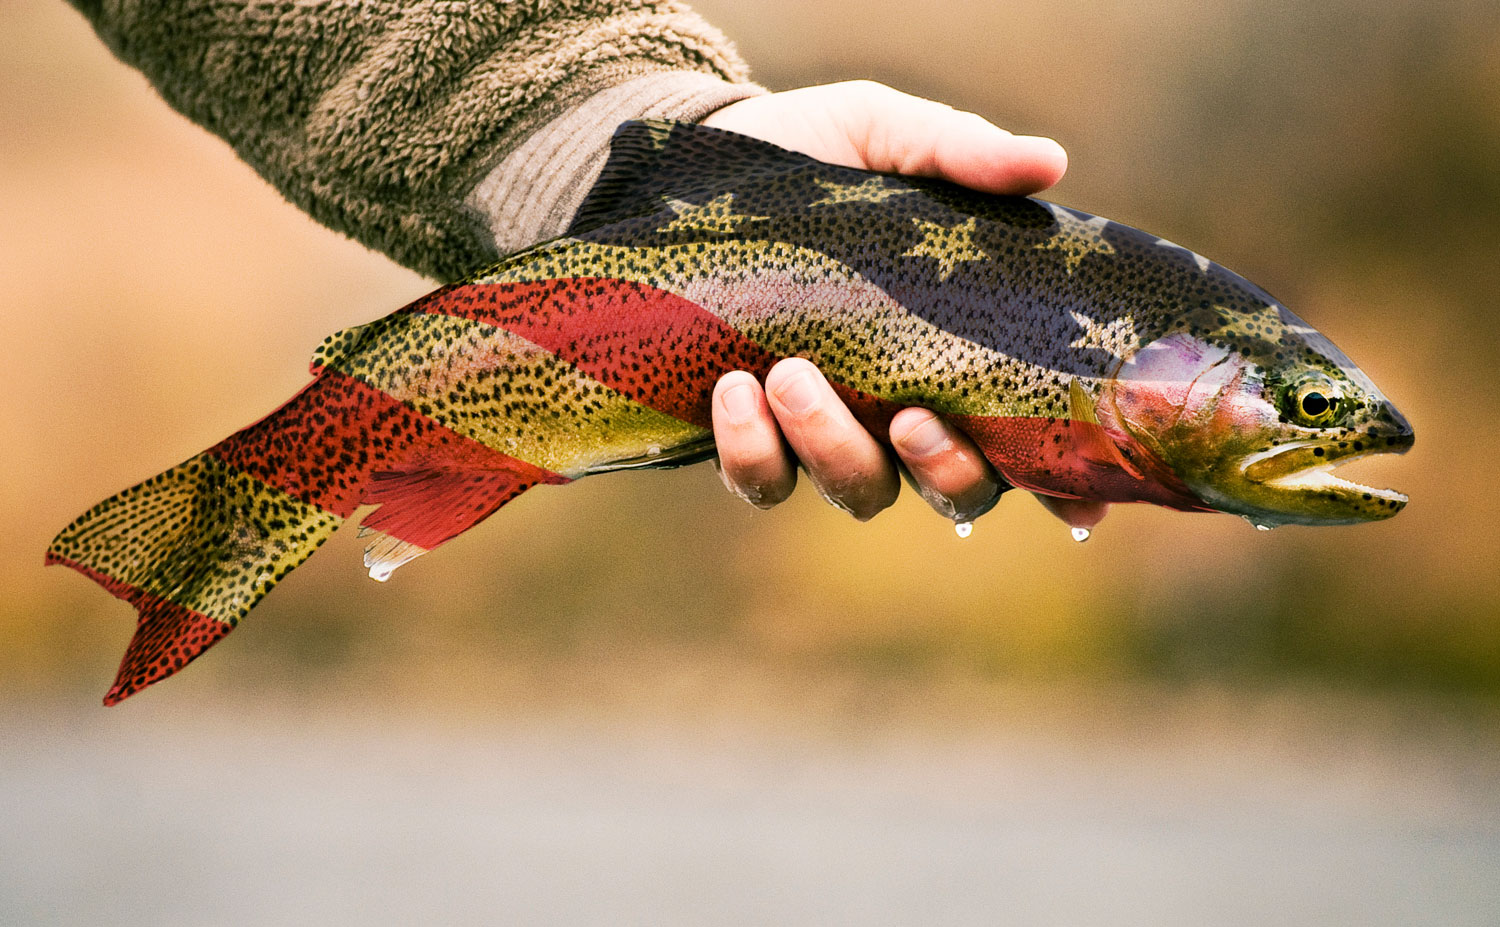 Buying US-Made Fly fishing Gear Helps US Fisheries - Fly Fishing